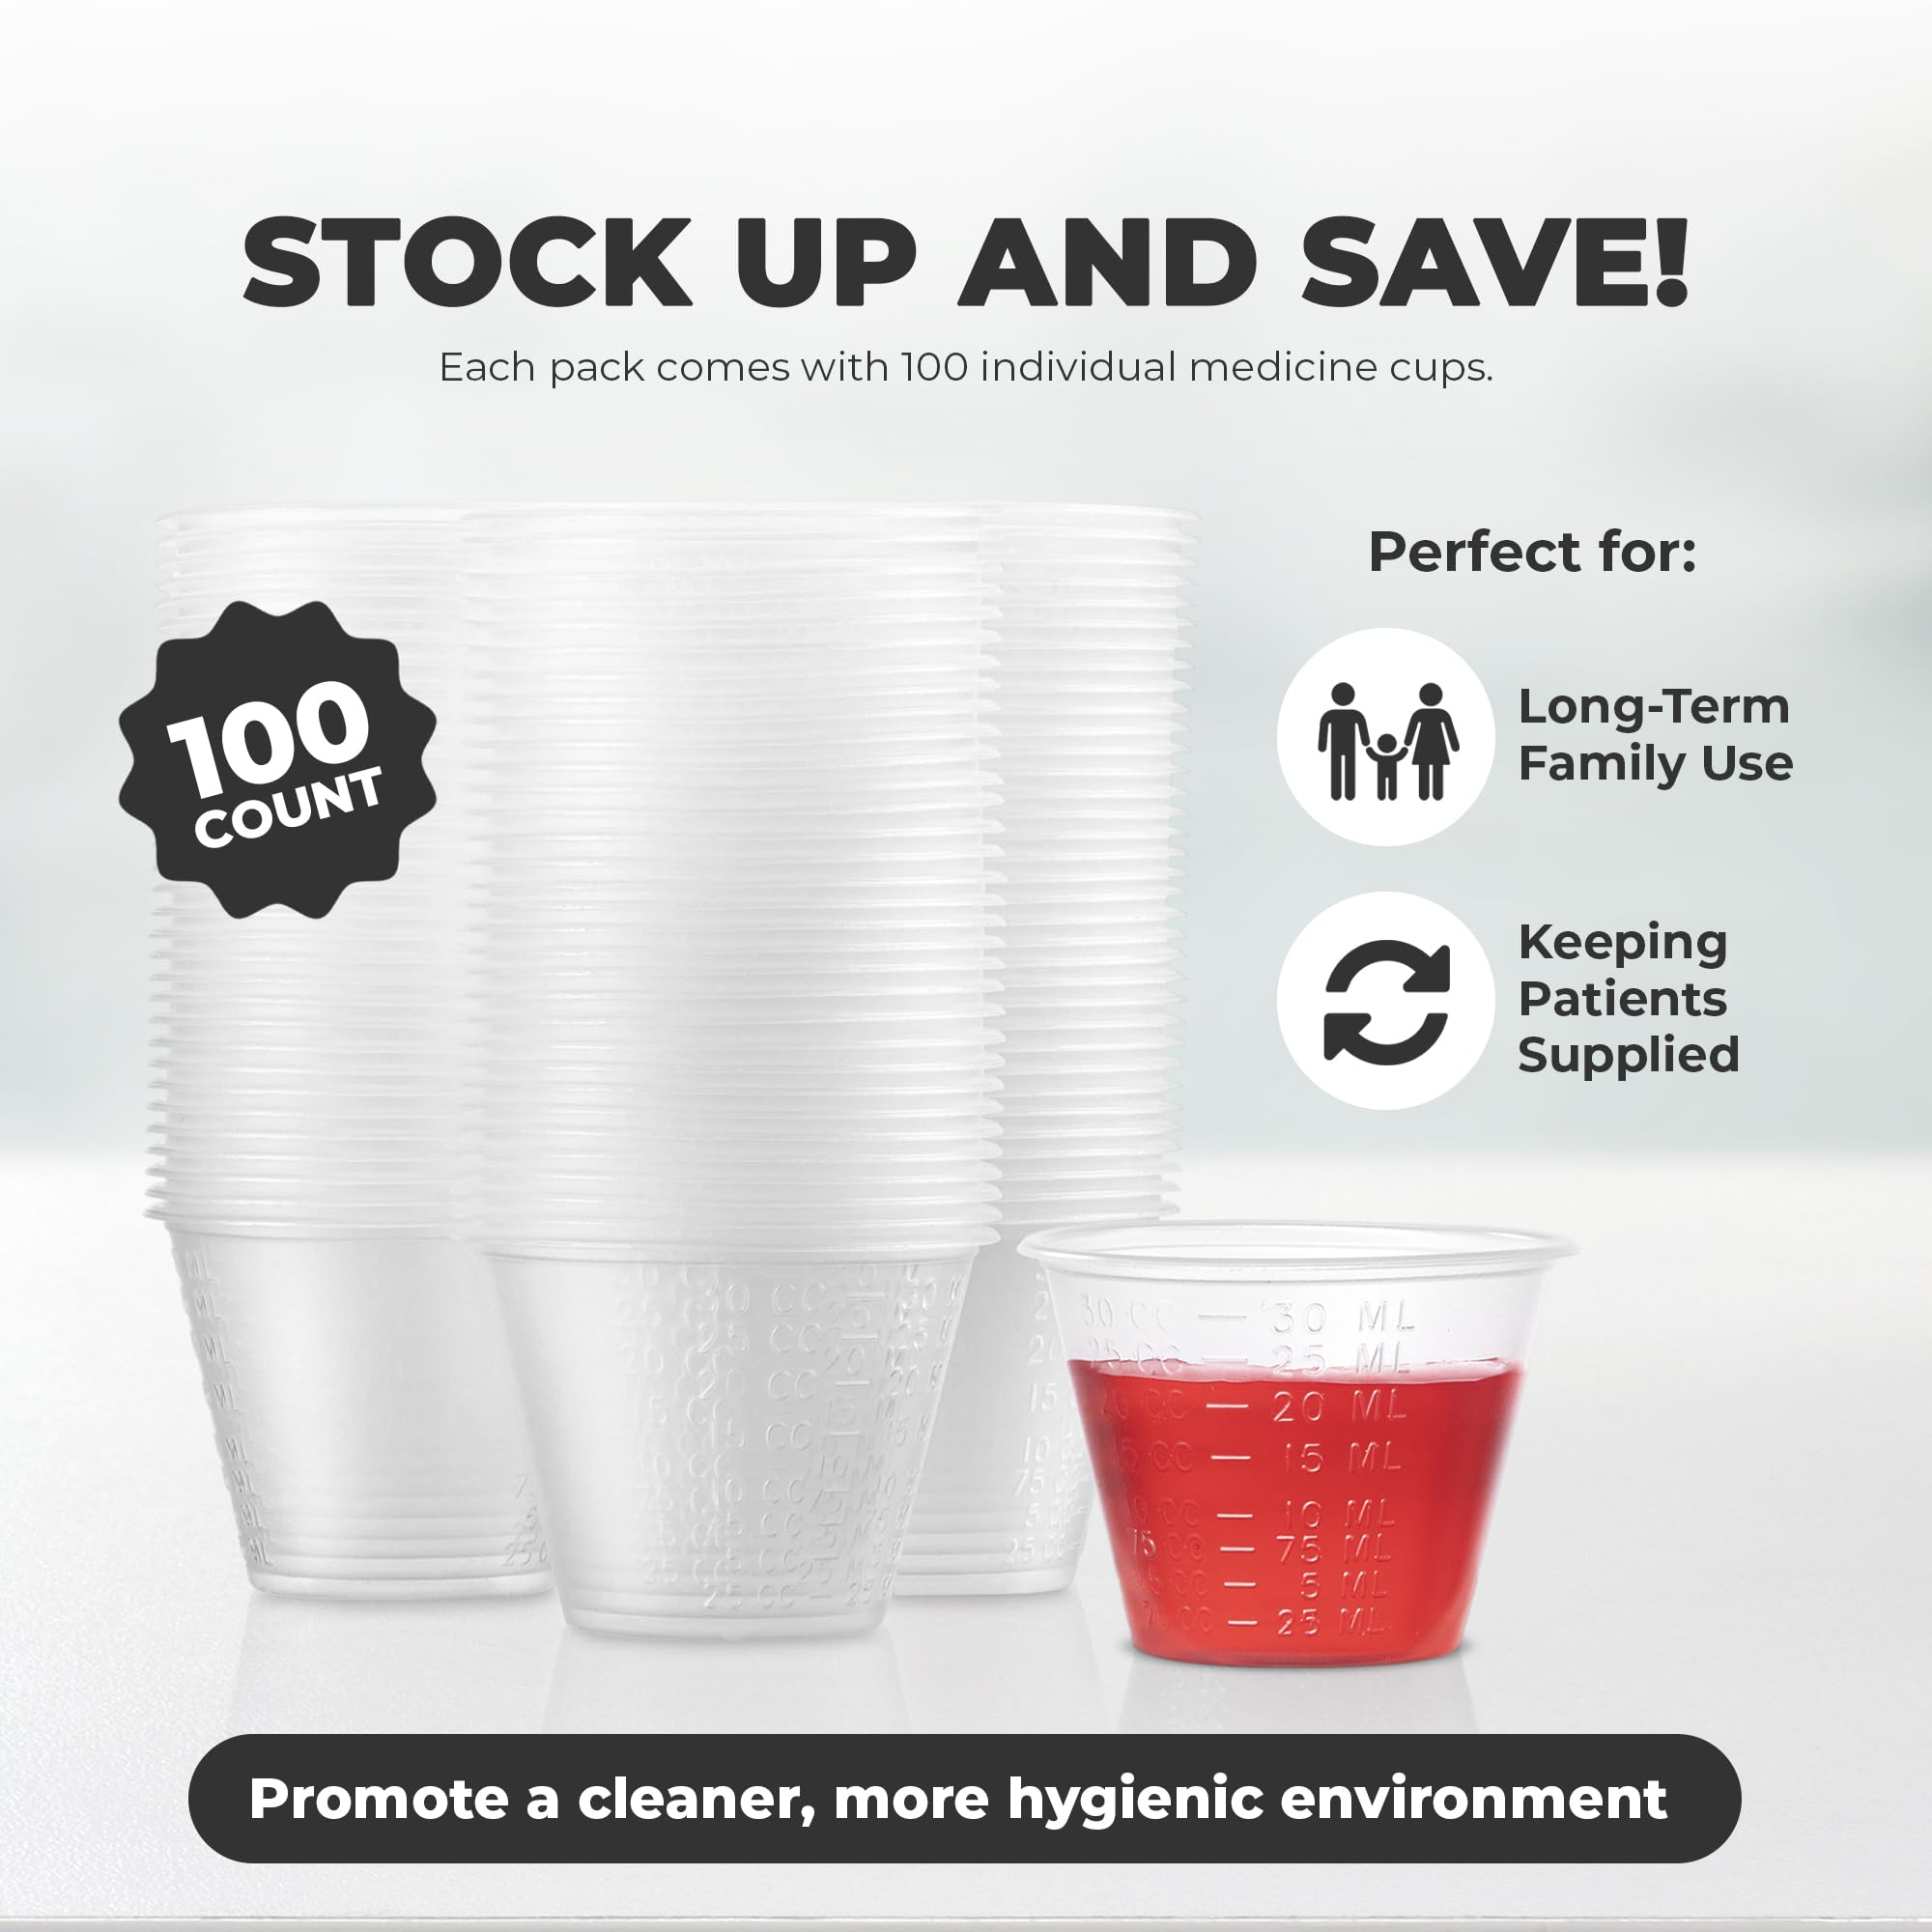 Graduated 1 oz. Plastic Medicine Cups, 100-Count, Detailed Liquid Measurements for Medications, Clear Containers, Disposable or Reusable, Supports Adults and Children